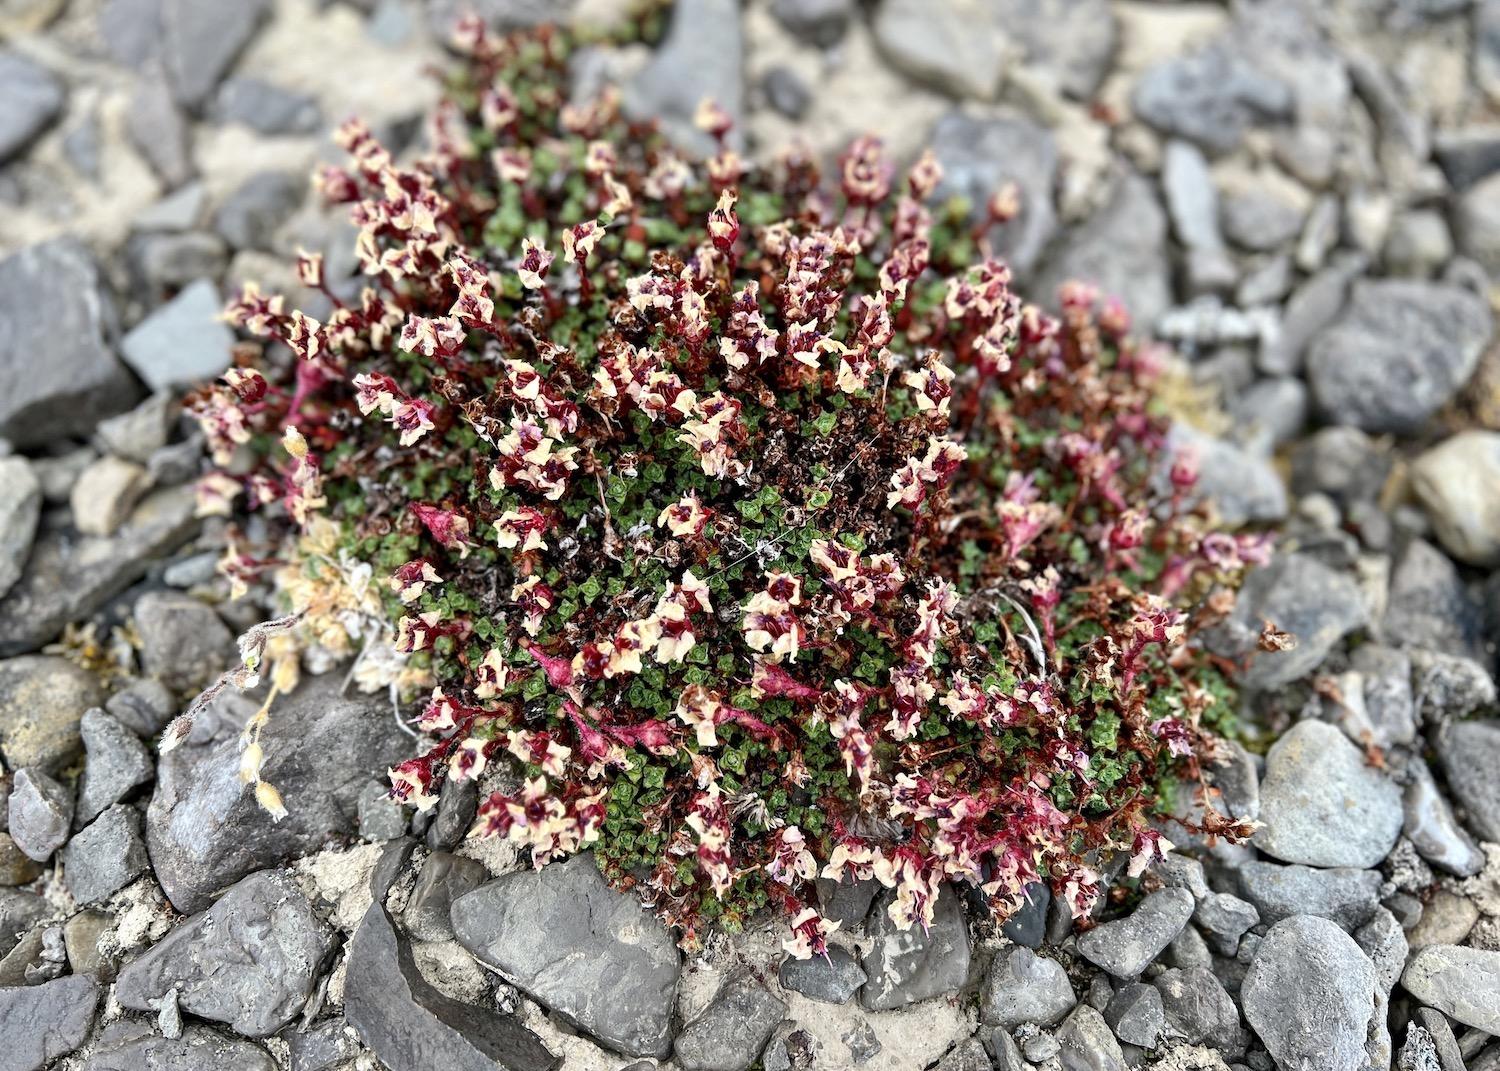 A few flowers were spotted on Beechey Island, including Purple Saxifrage, the official flower of Nunavut.